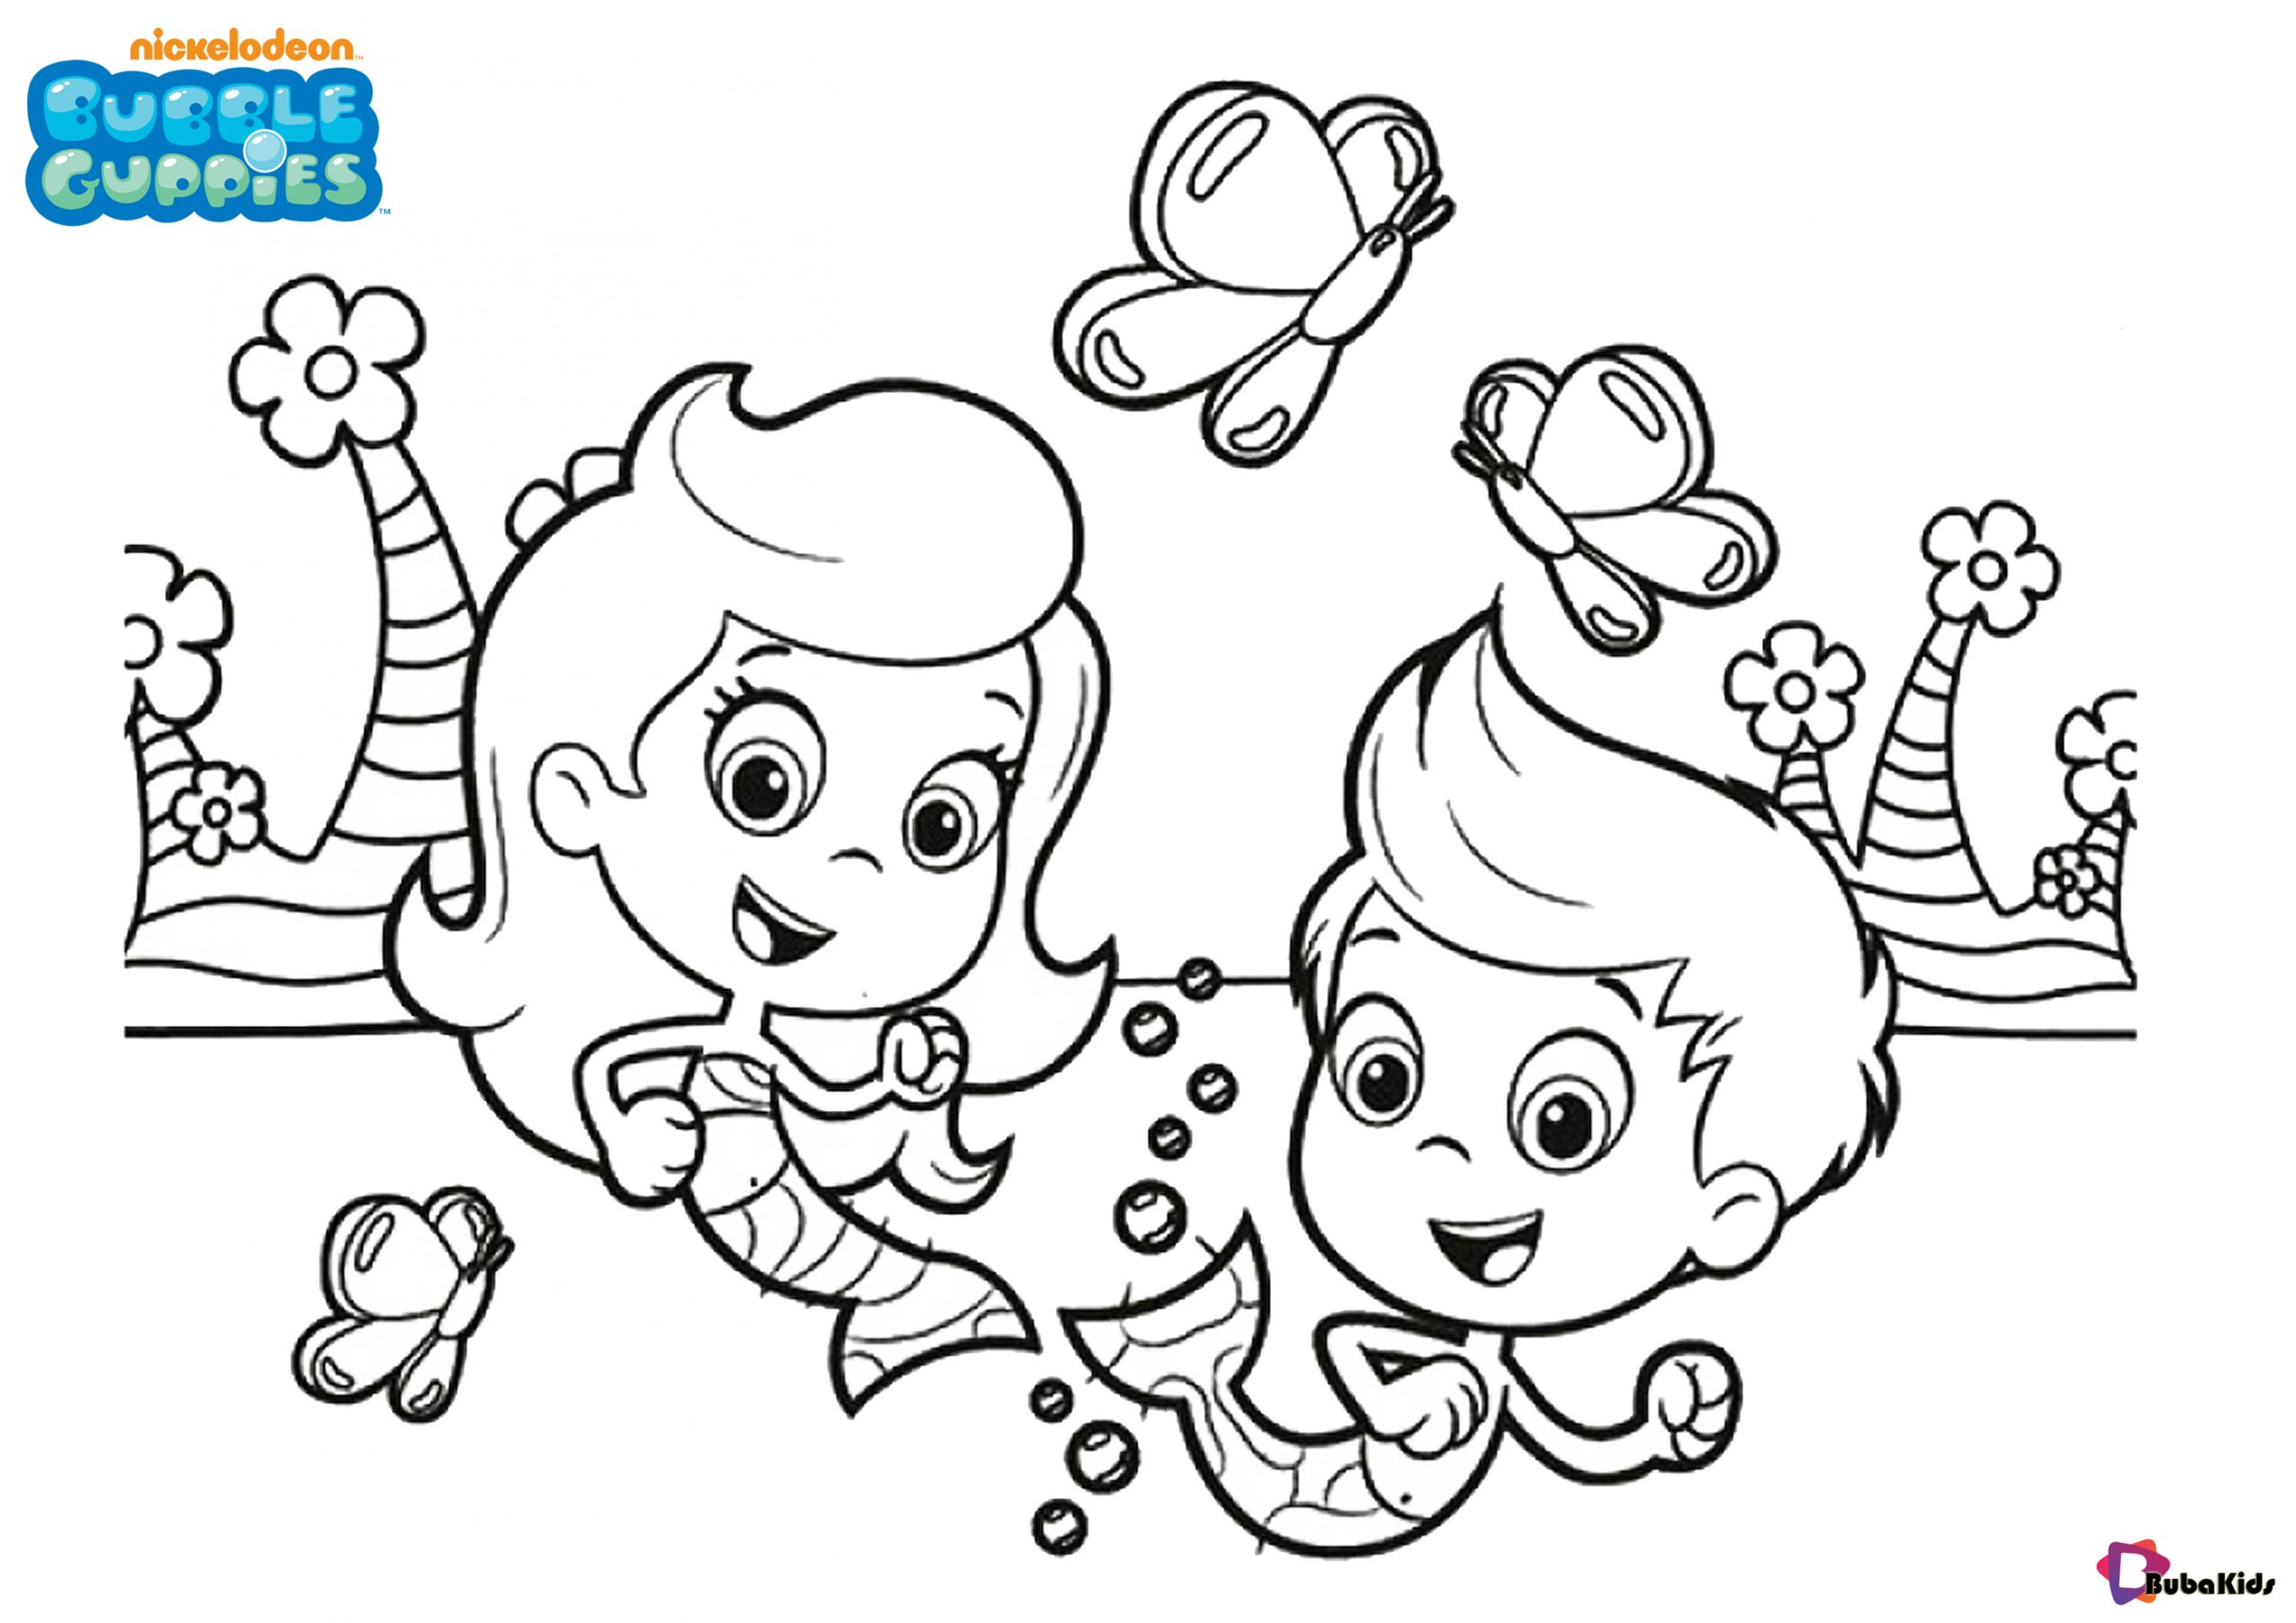 Easy and printable bubble guppies colouring pages for kids Wallpaper